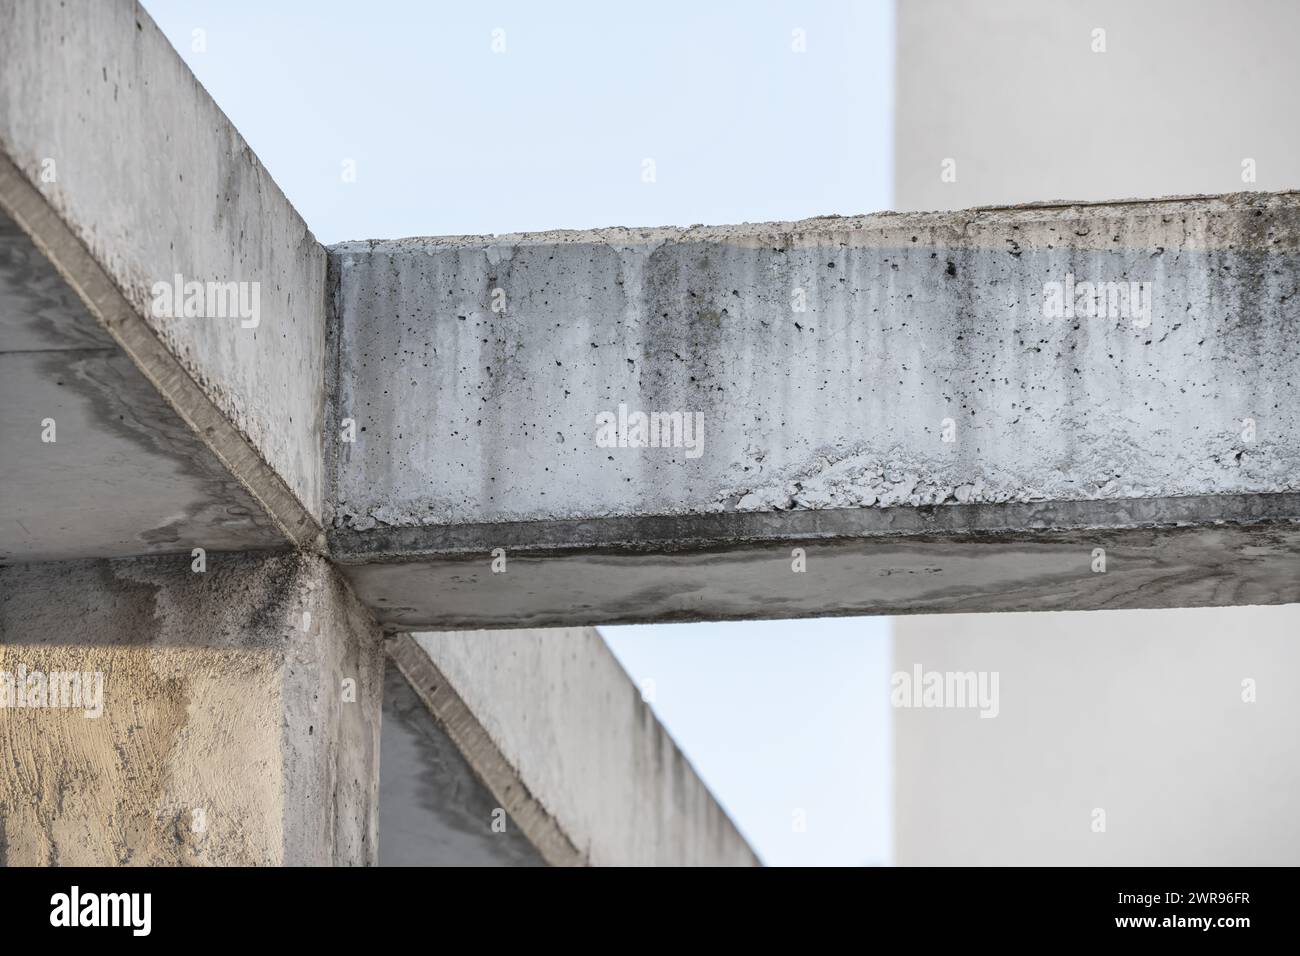 A crossbar of concrete beams and columns outdoors Stock Photo